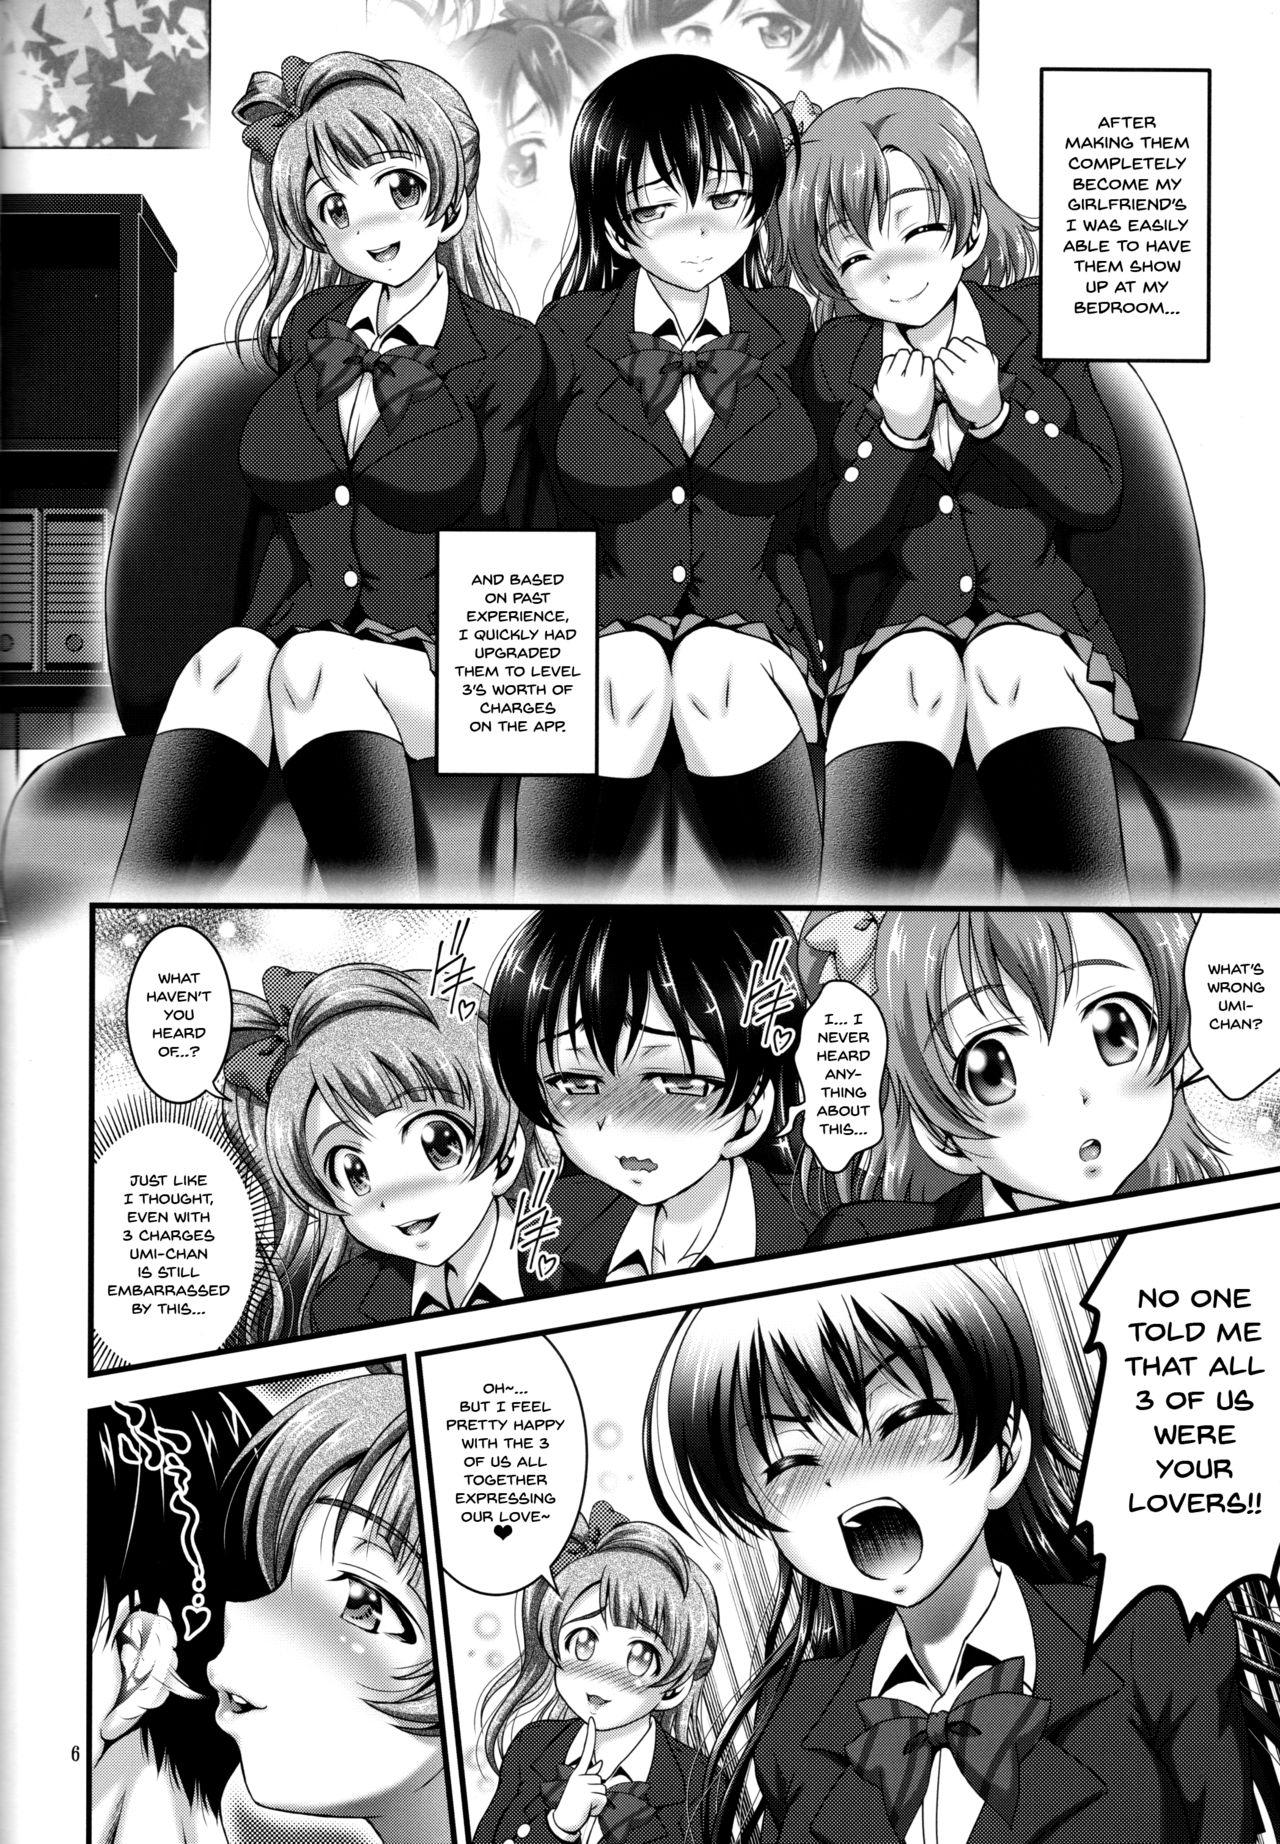 Ffm Ore Yome Saimin 4 | My Wife Hypnosis 4 - Love live Perfect Girl Porn - Page 7